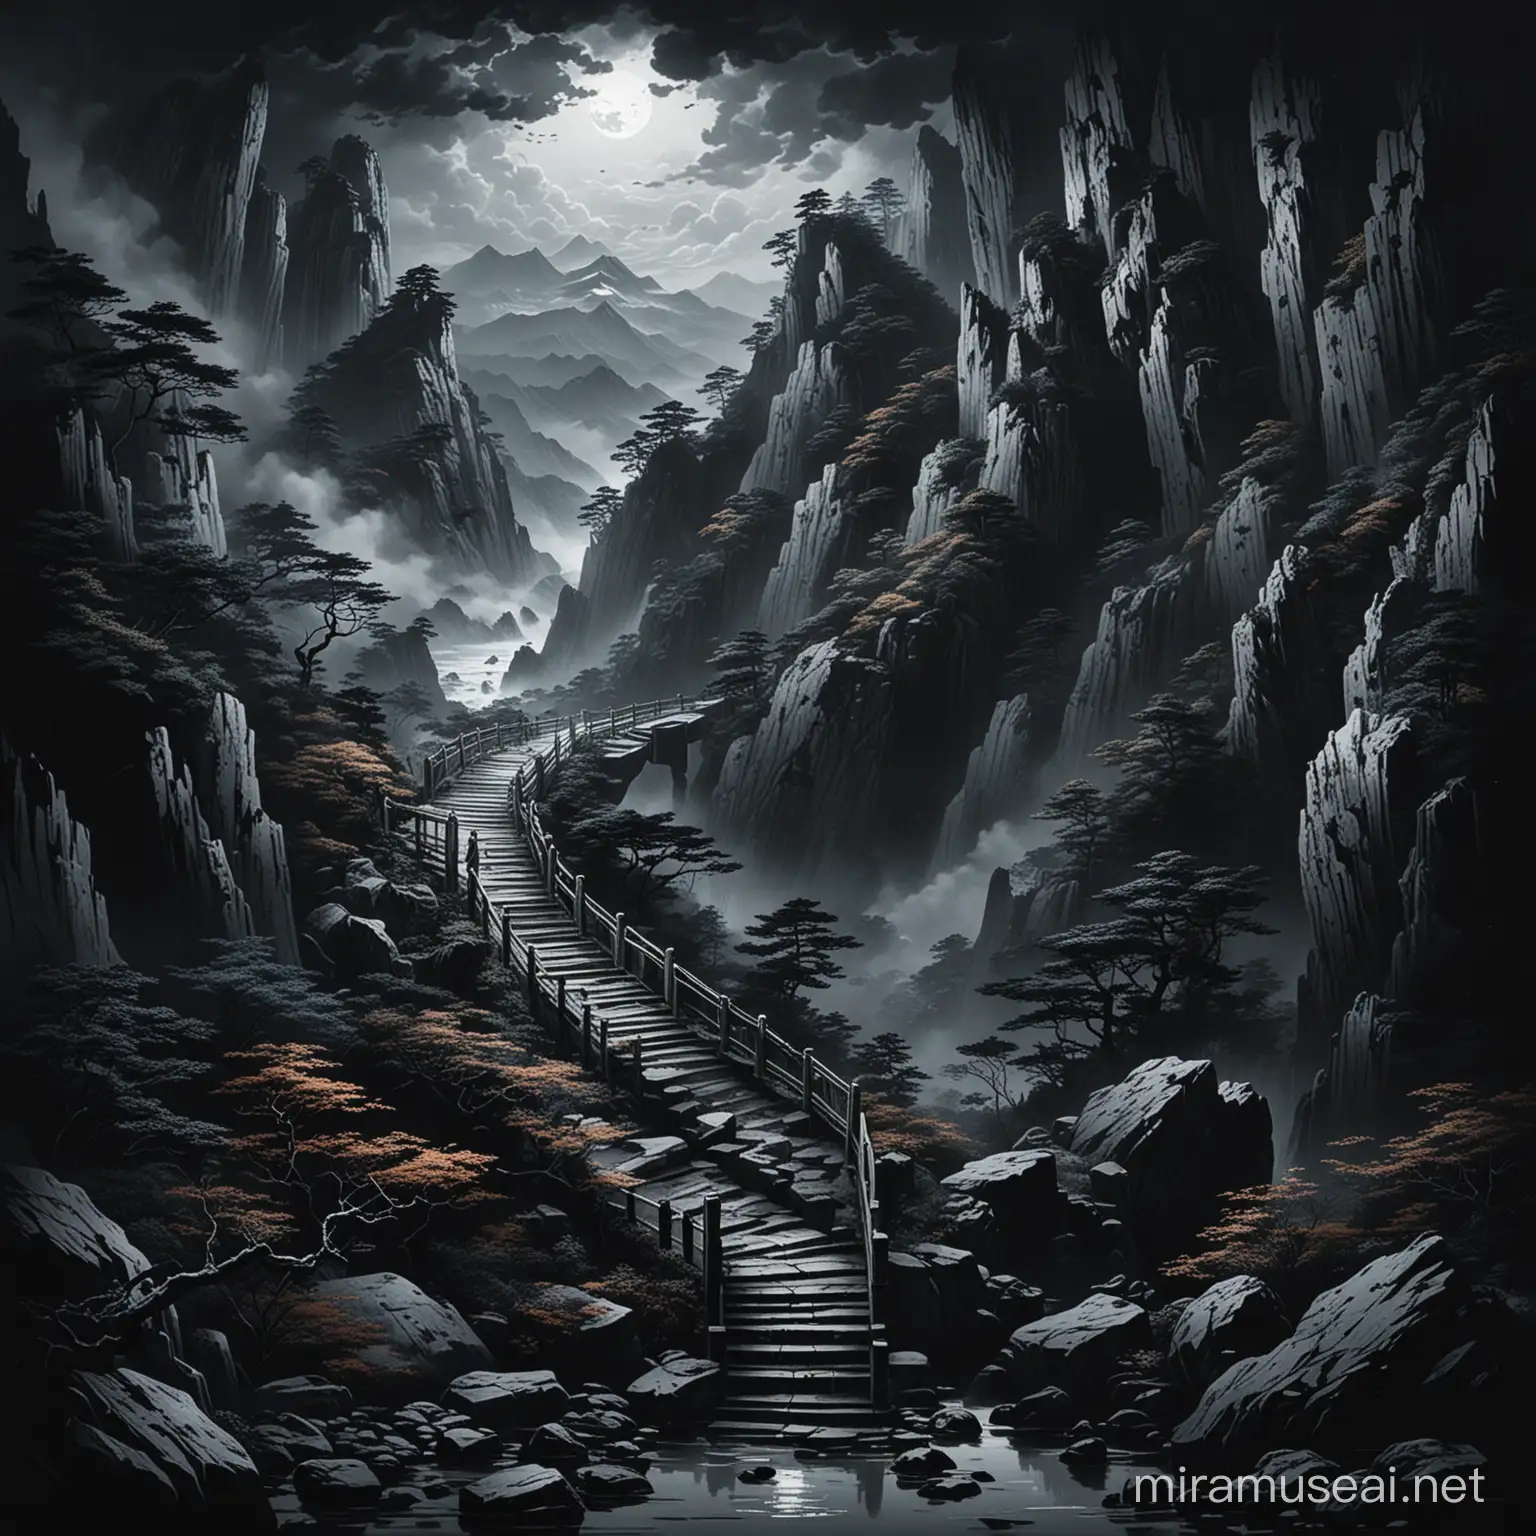 Mystical Japanese Mountain Staircase A Dark and Ominous Journey Through Time and Space